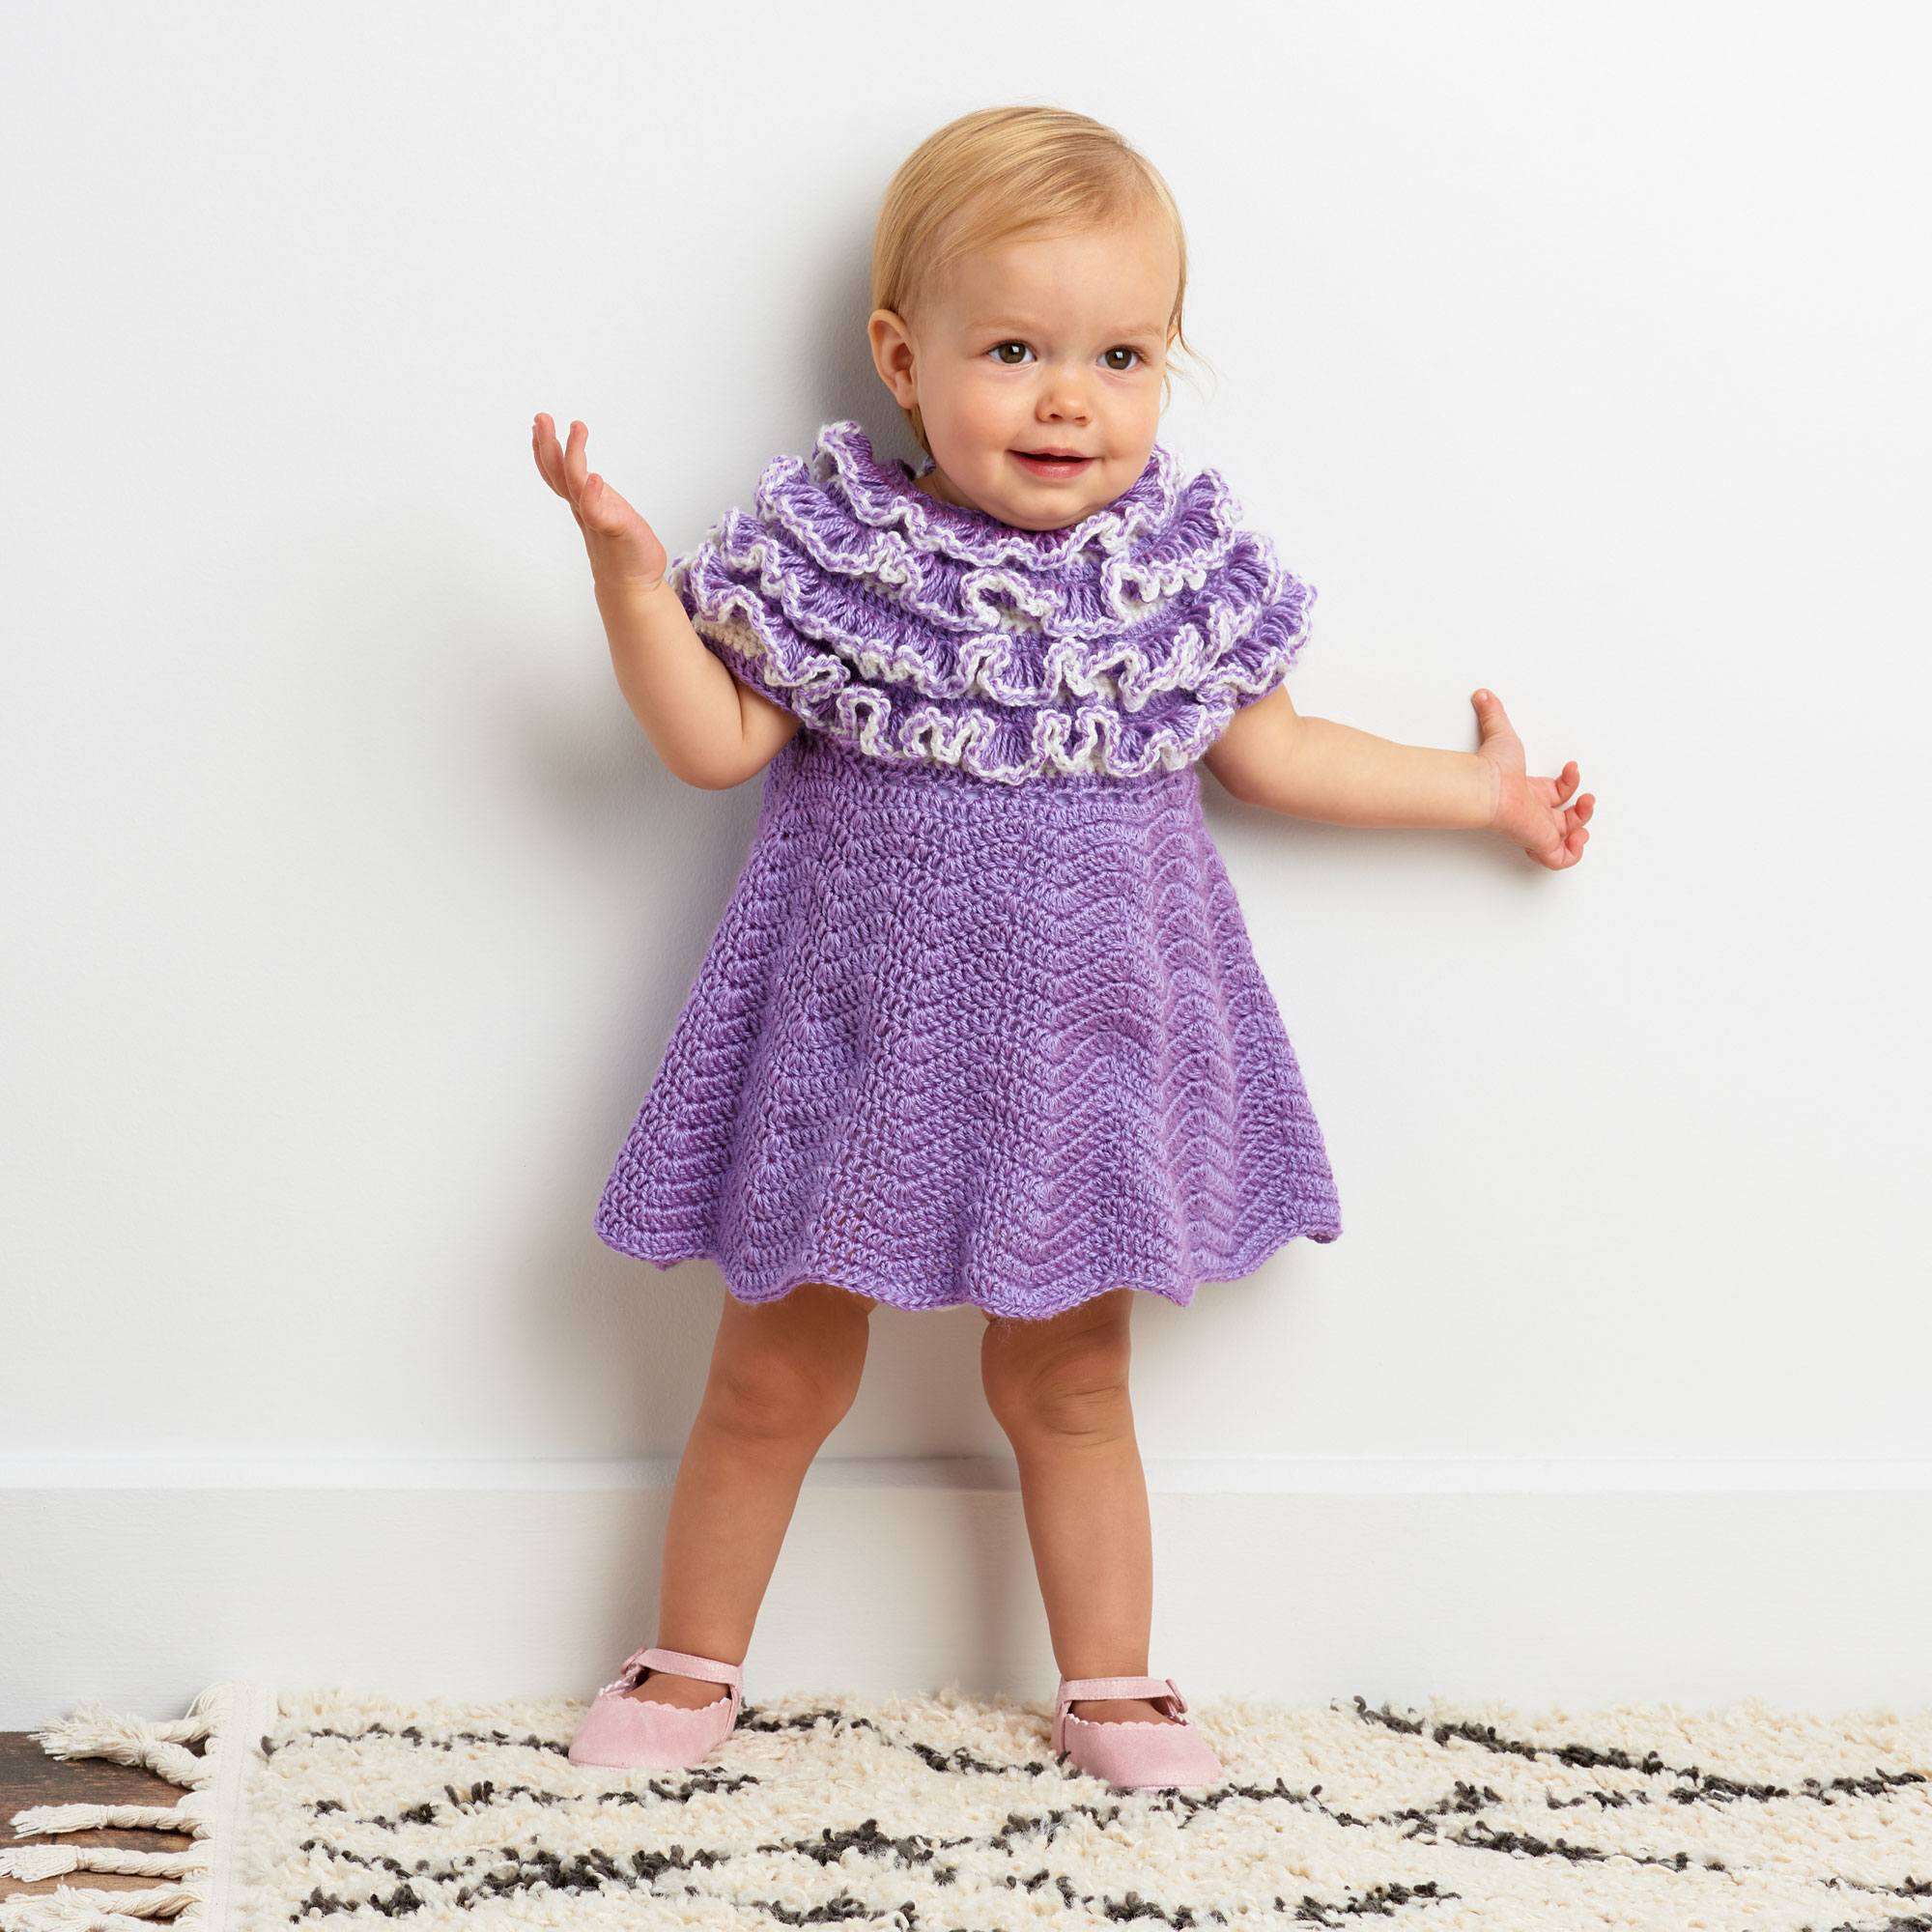 Sew a Baby Gown Pattern - YouTube